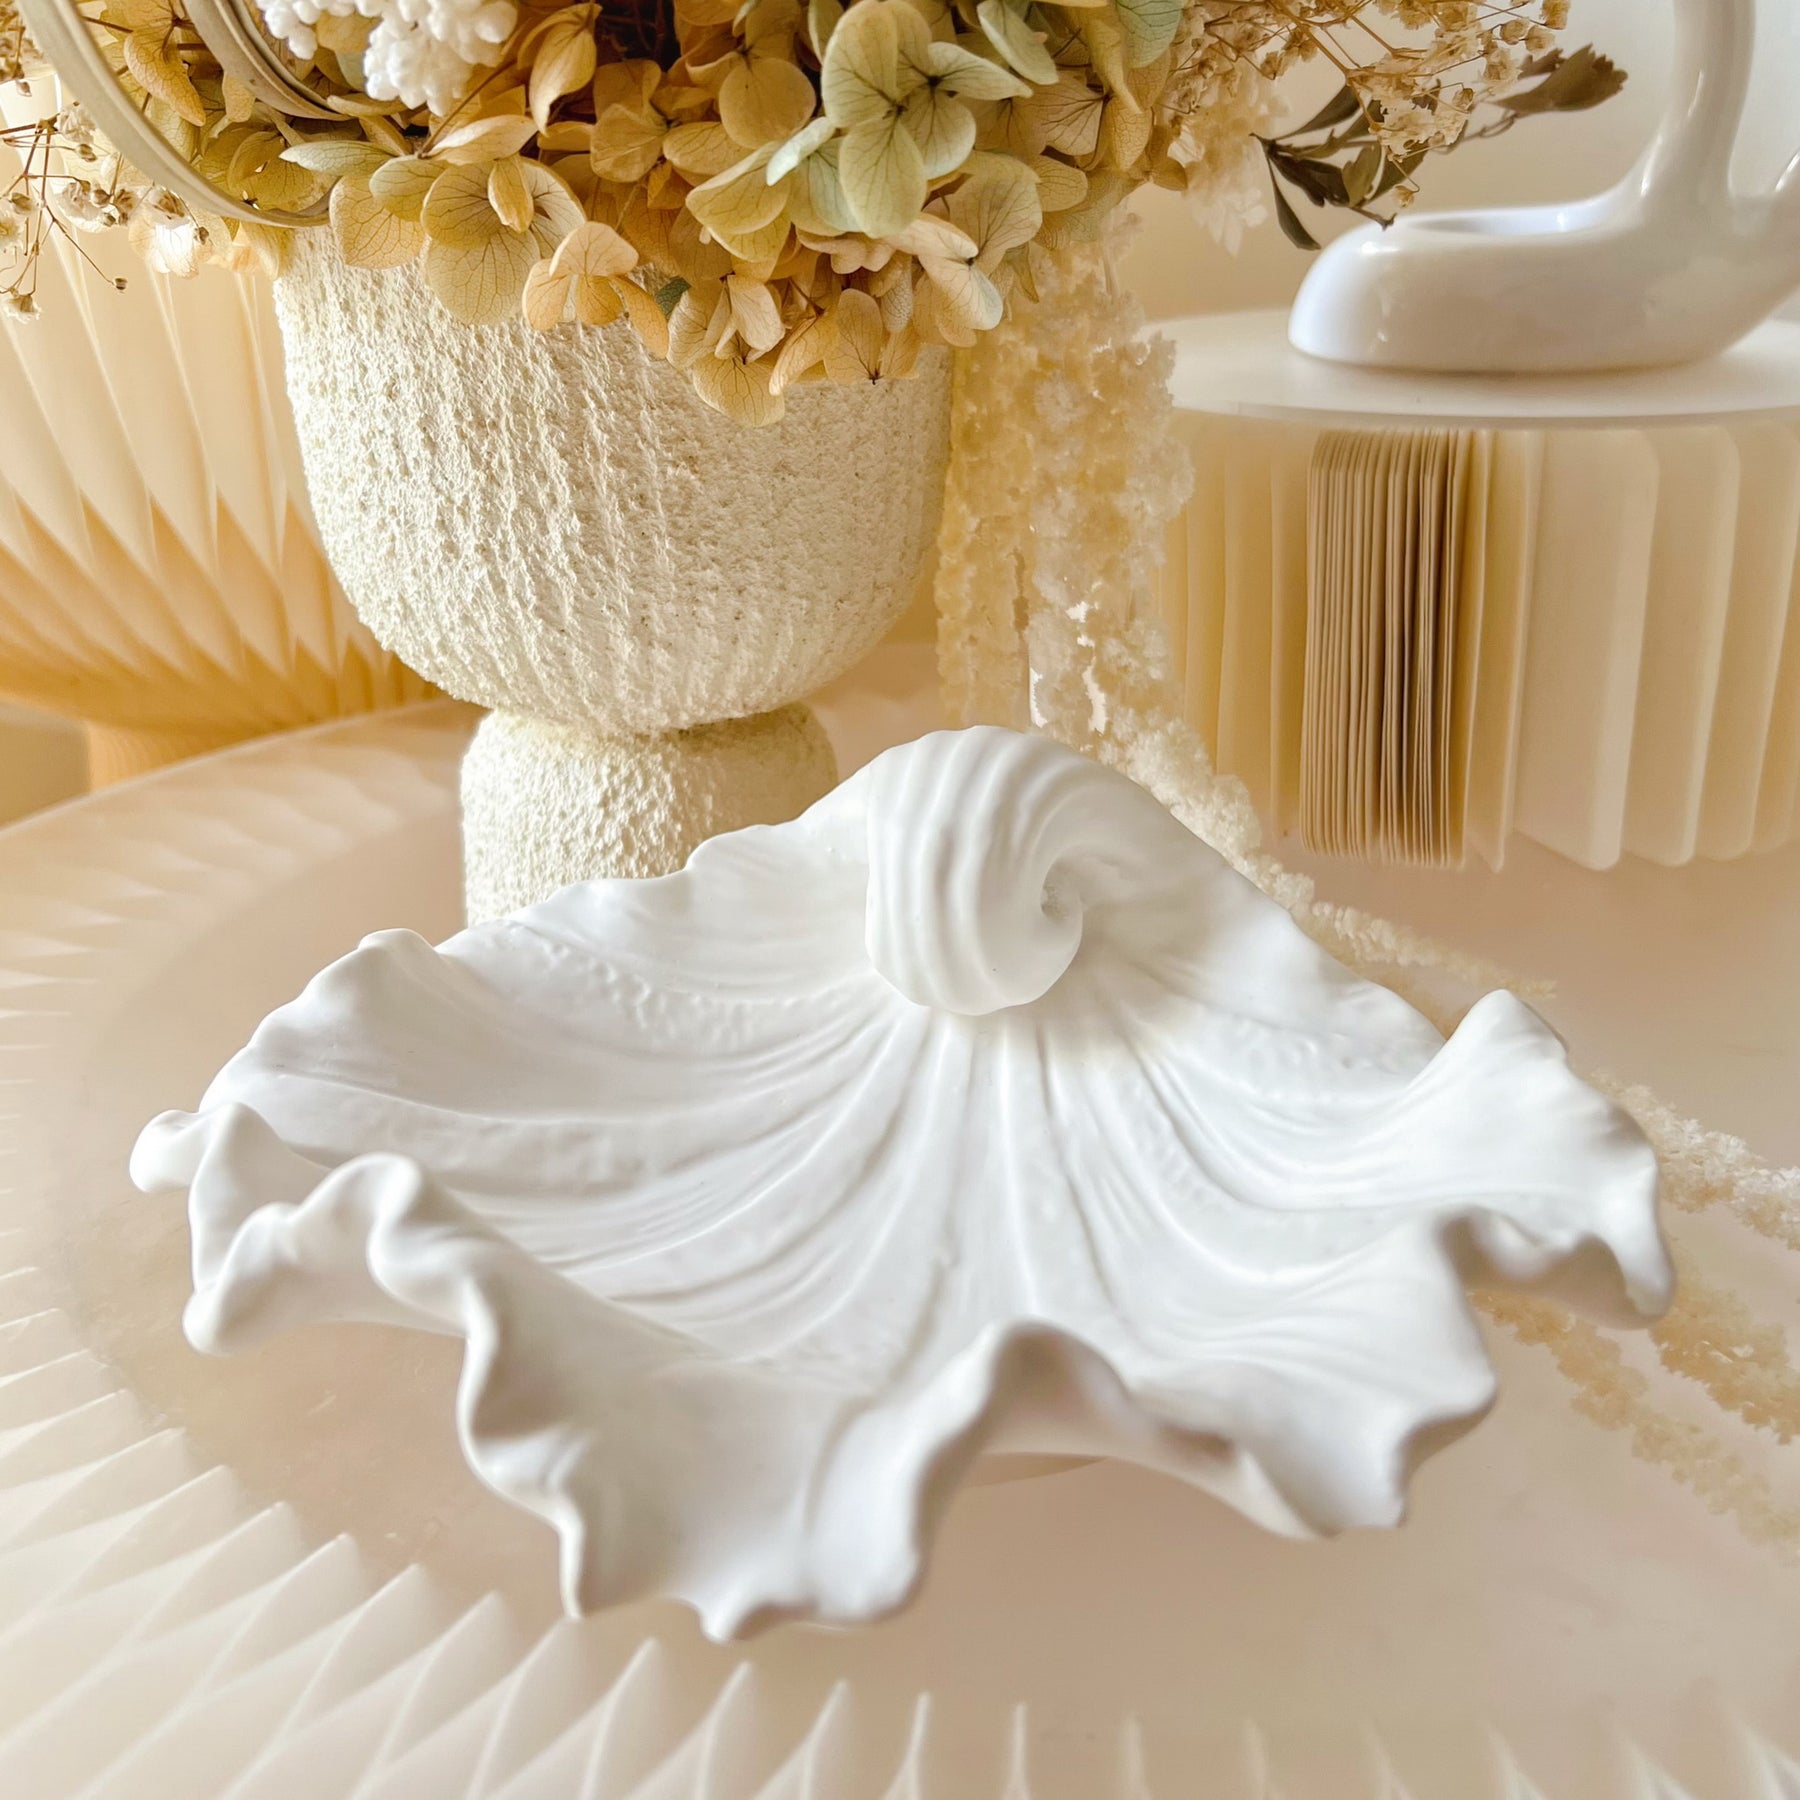 Handcrafted Large Shell Decorative Tray | Trinket Dish - LMJ Candles